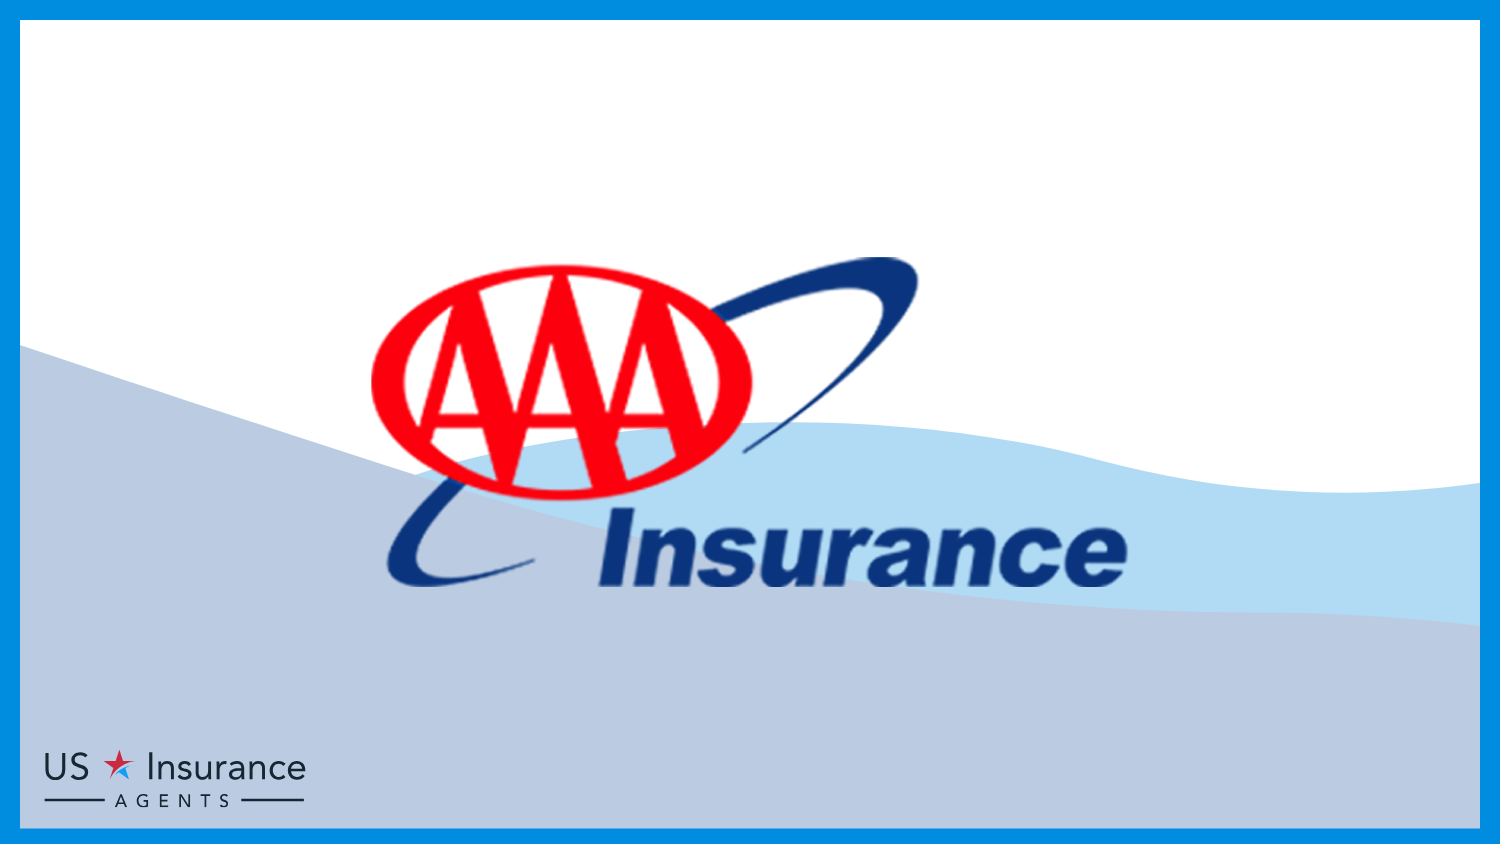 AAA: Best Business Insurance for Bloggers